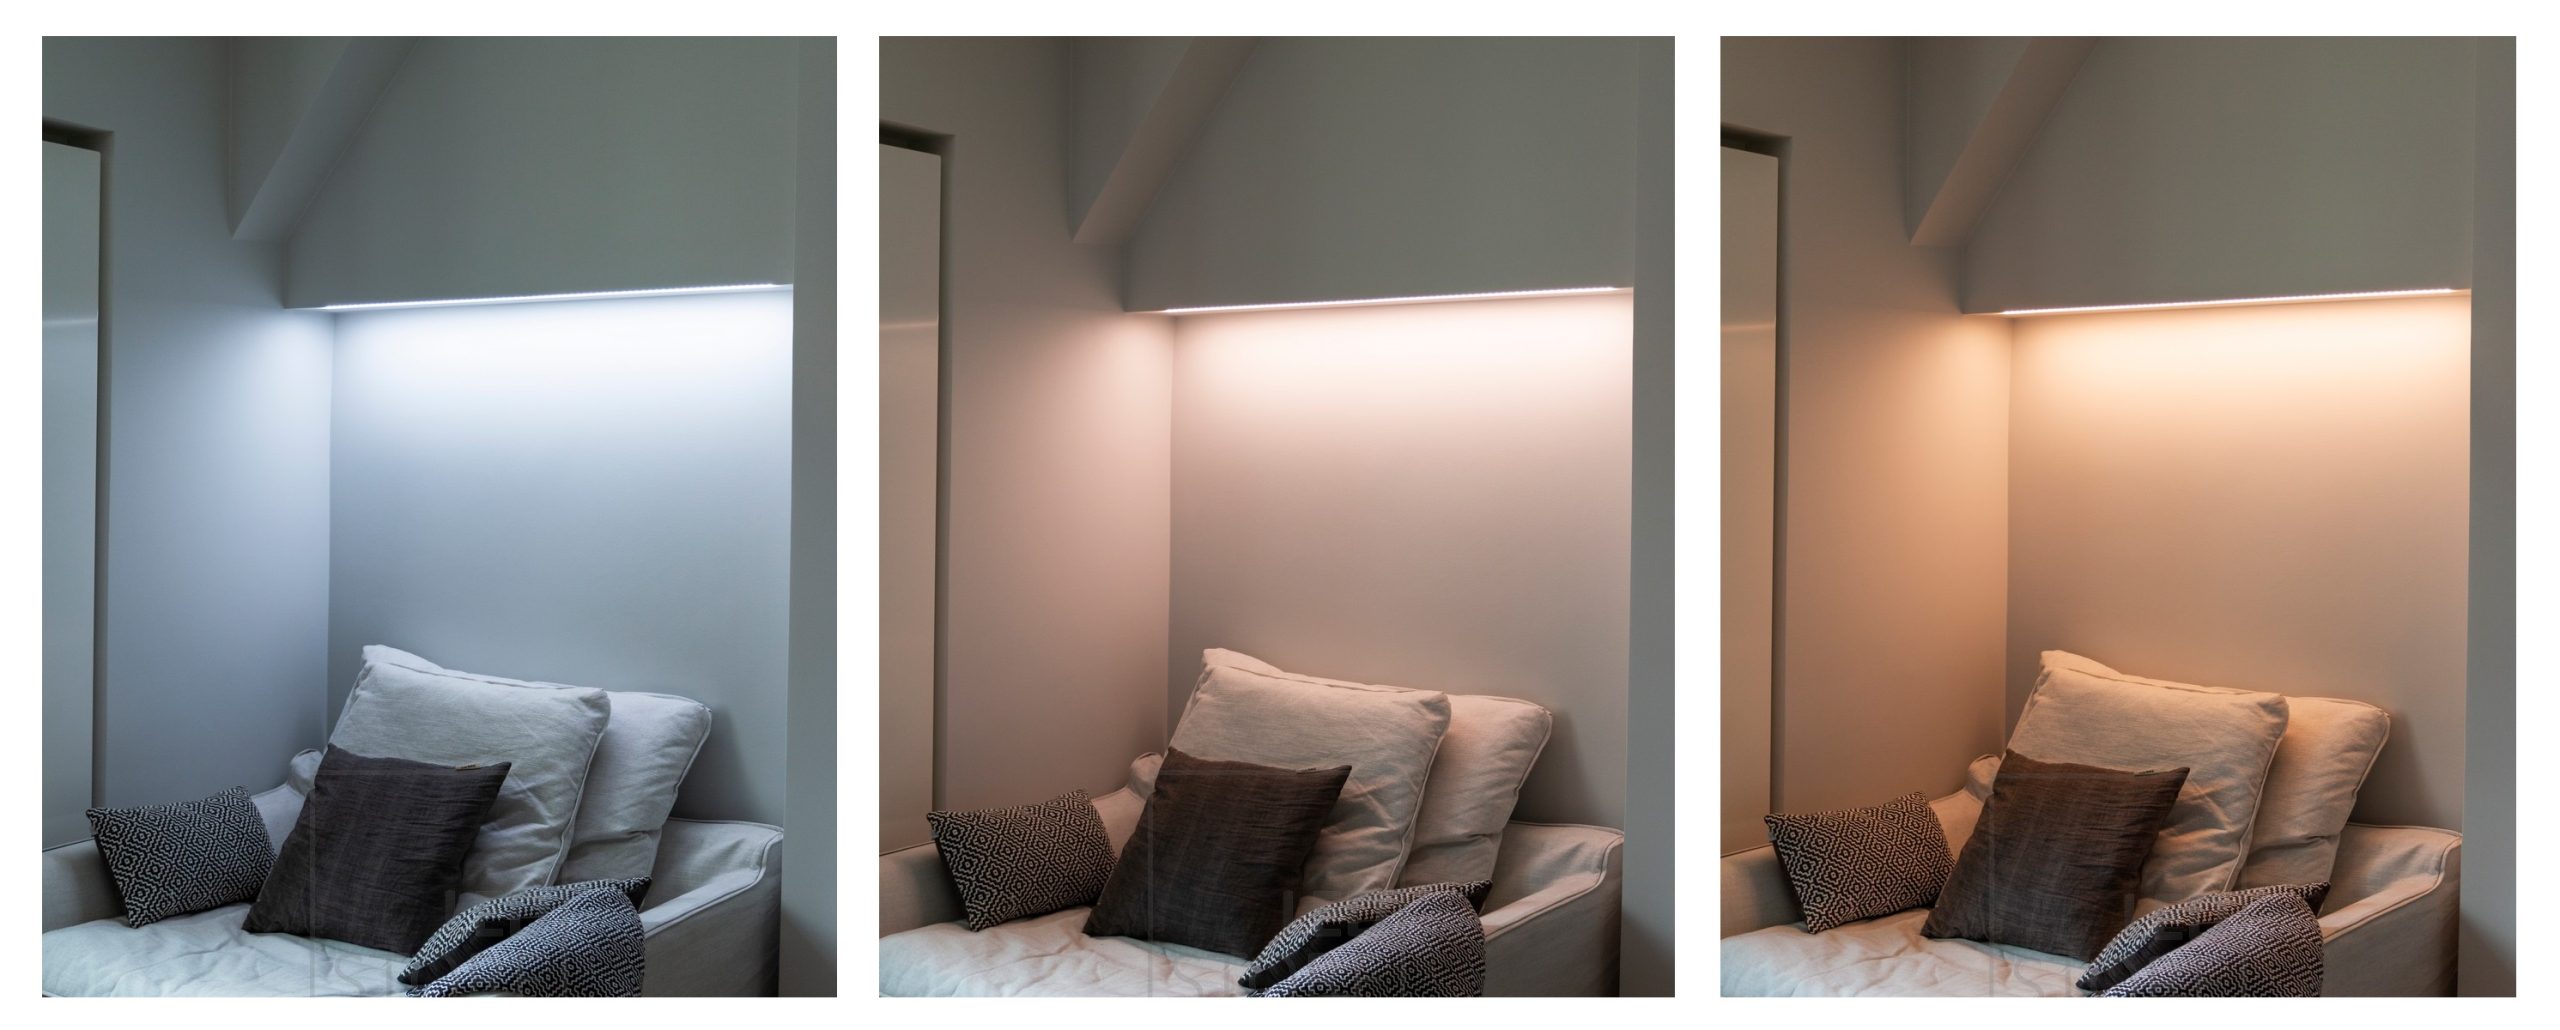 Bedroom lighting with temperature control